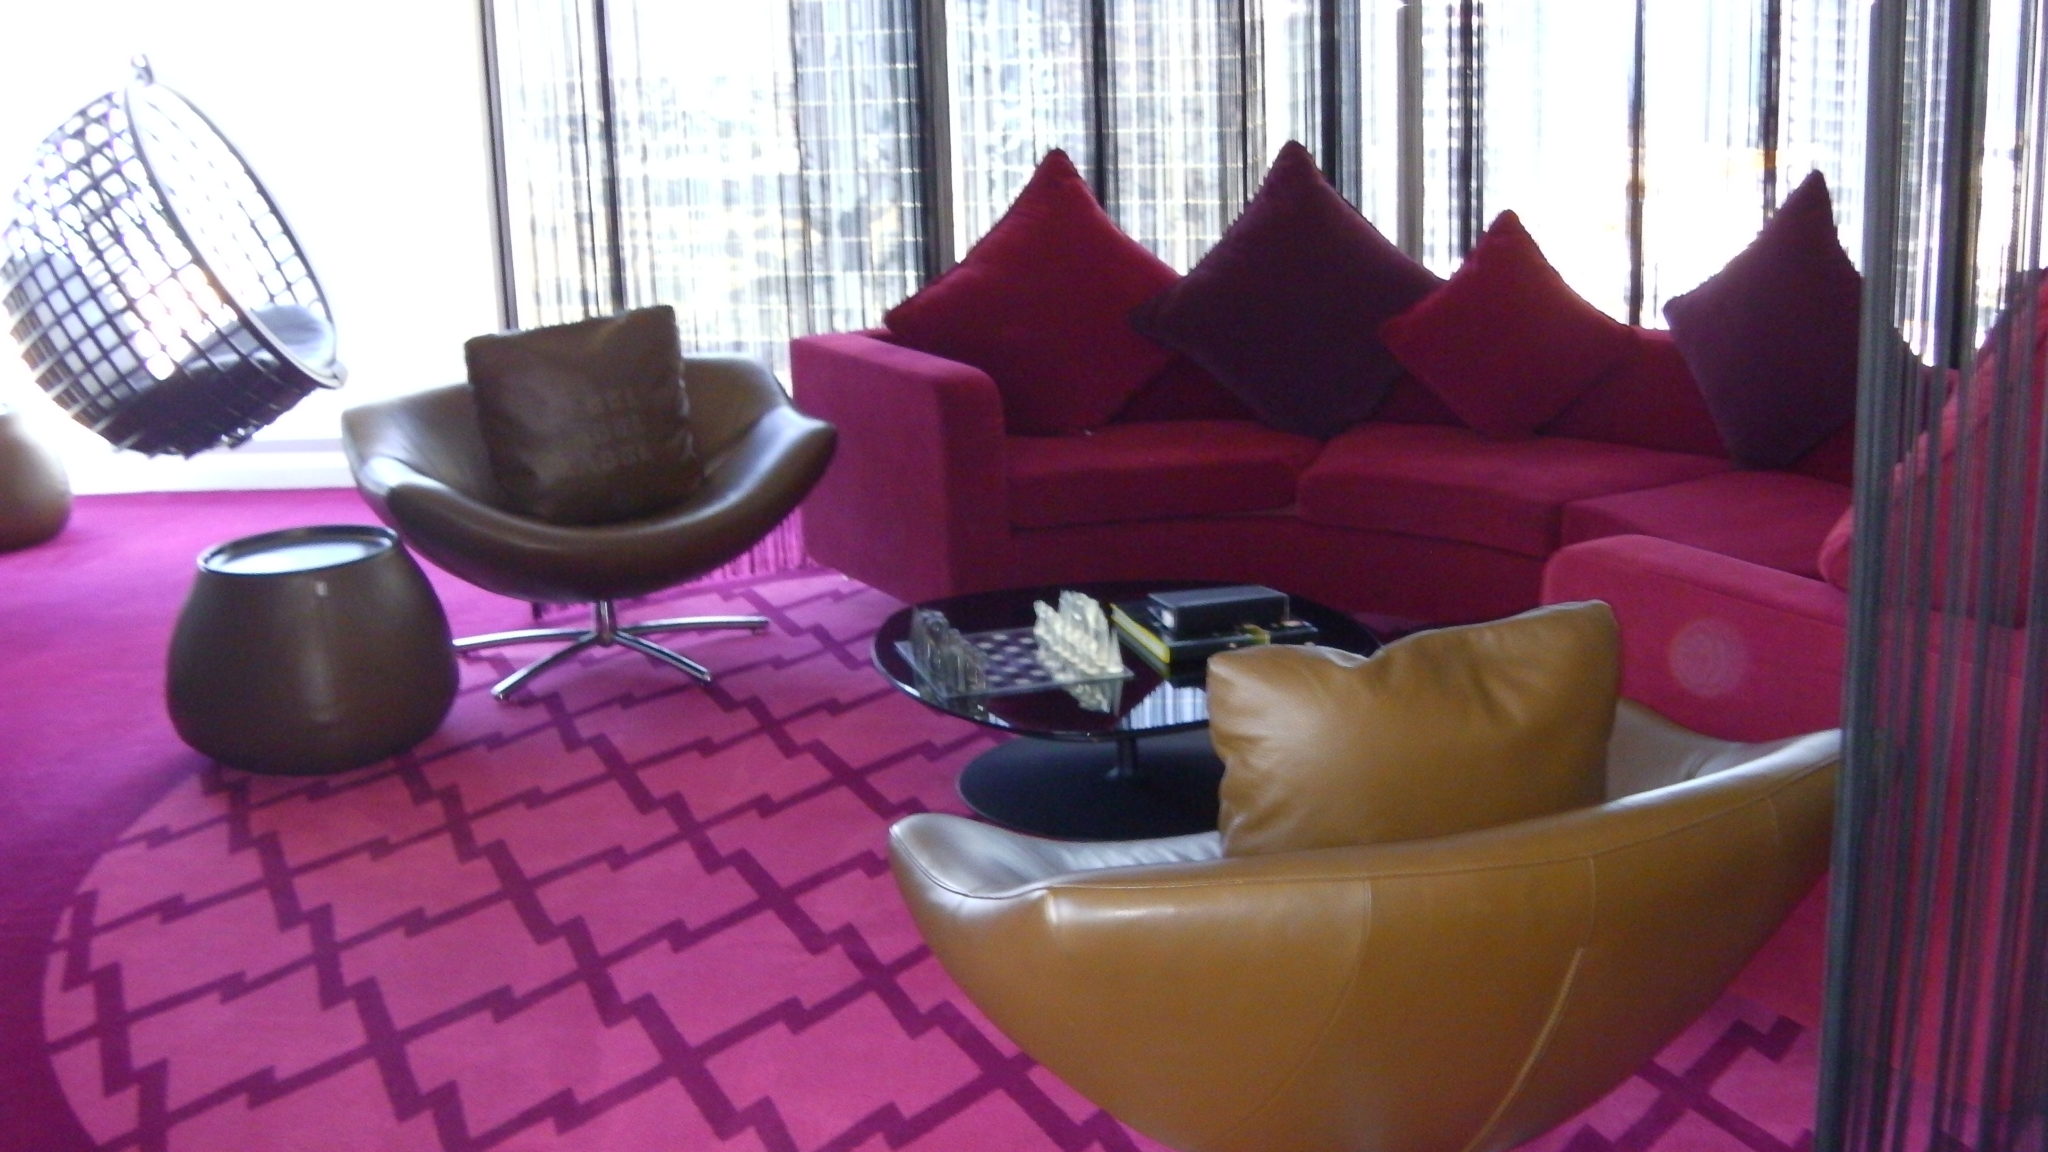 The party suite with no party @W Doha